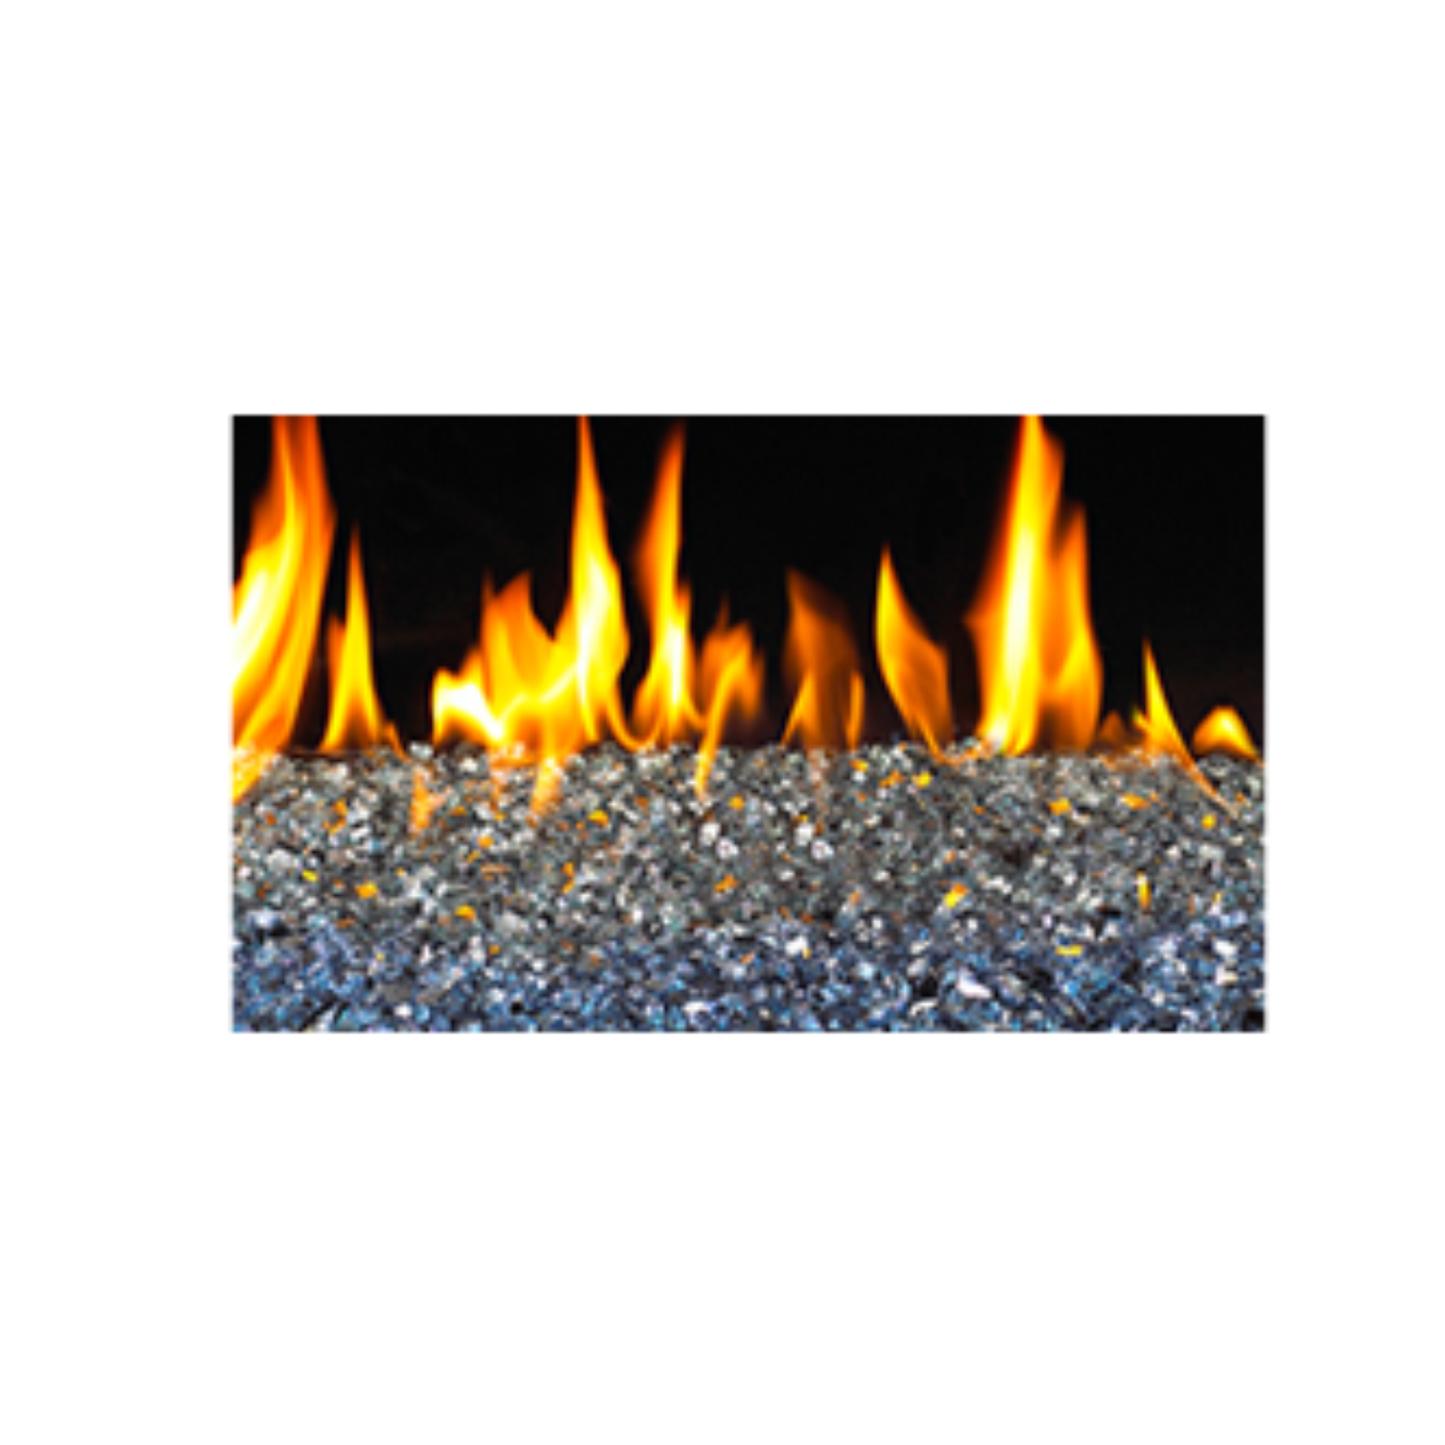 Realfyre Blue‚ Reflective 1/4 Inch  Crushed Fire Glass 10 lbs - GL10NR